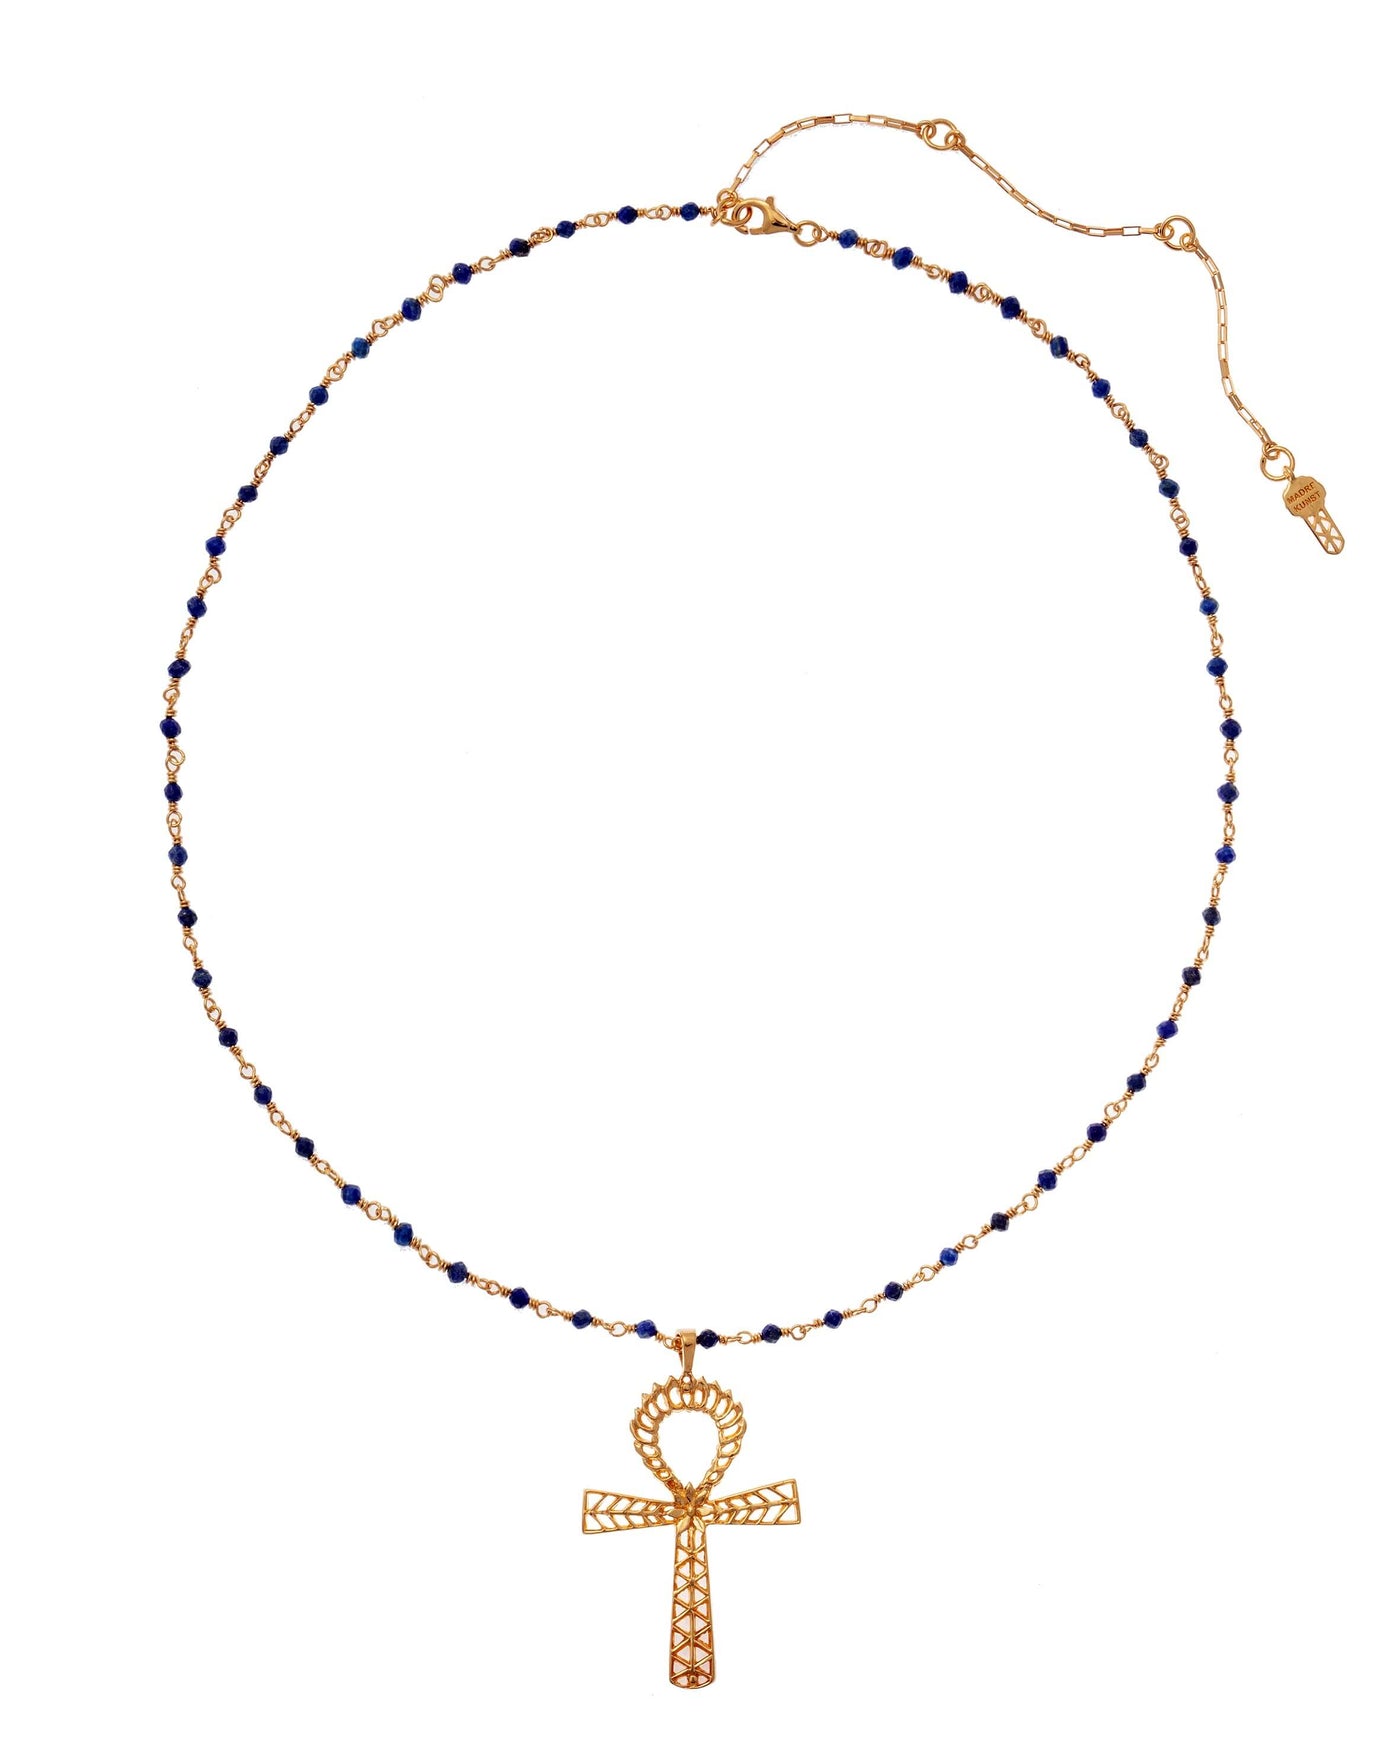 Ankh handmade necklace with silver wire and natural stone beads. Silver, gold-plated